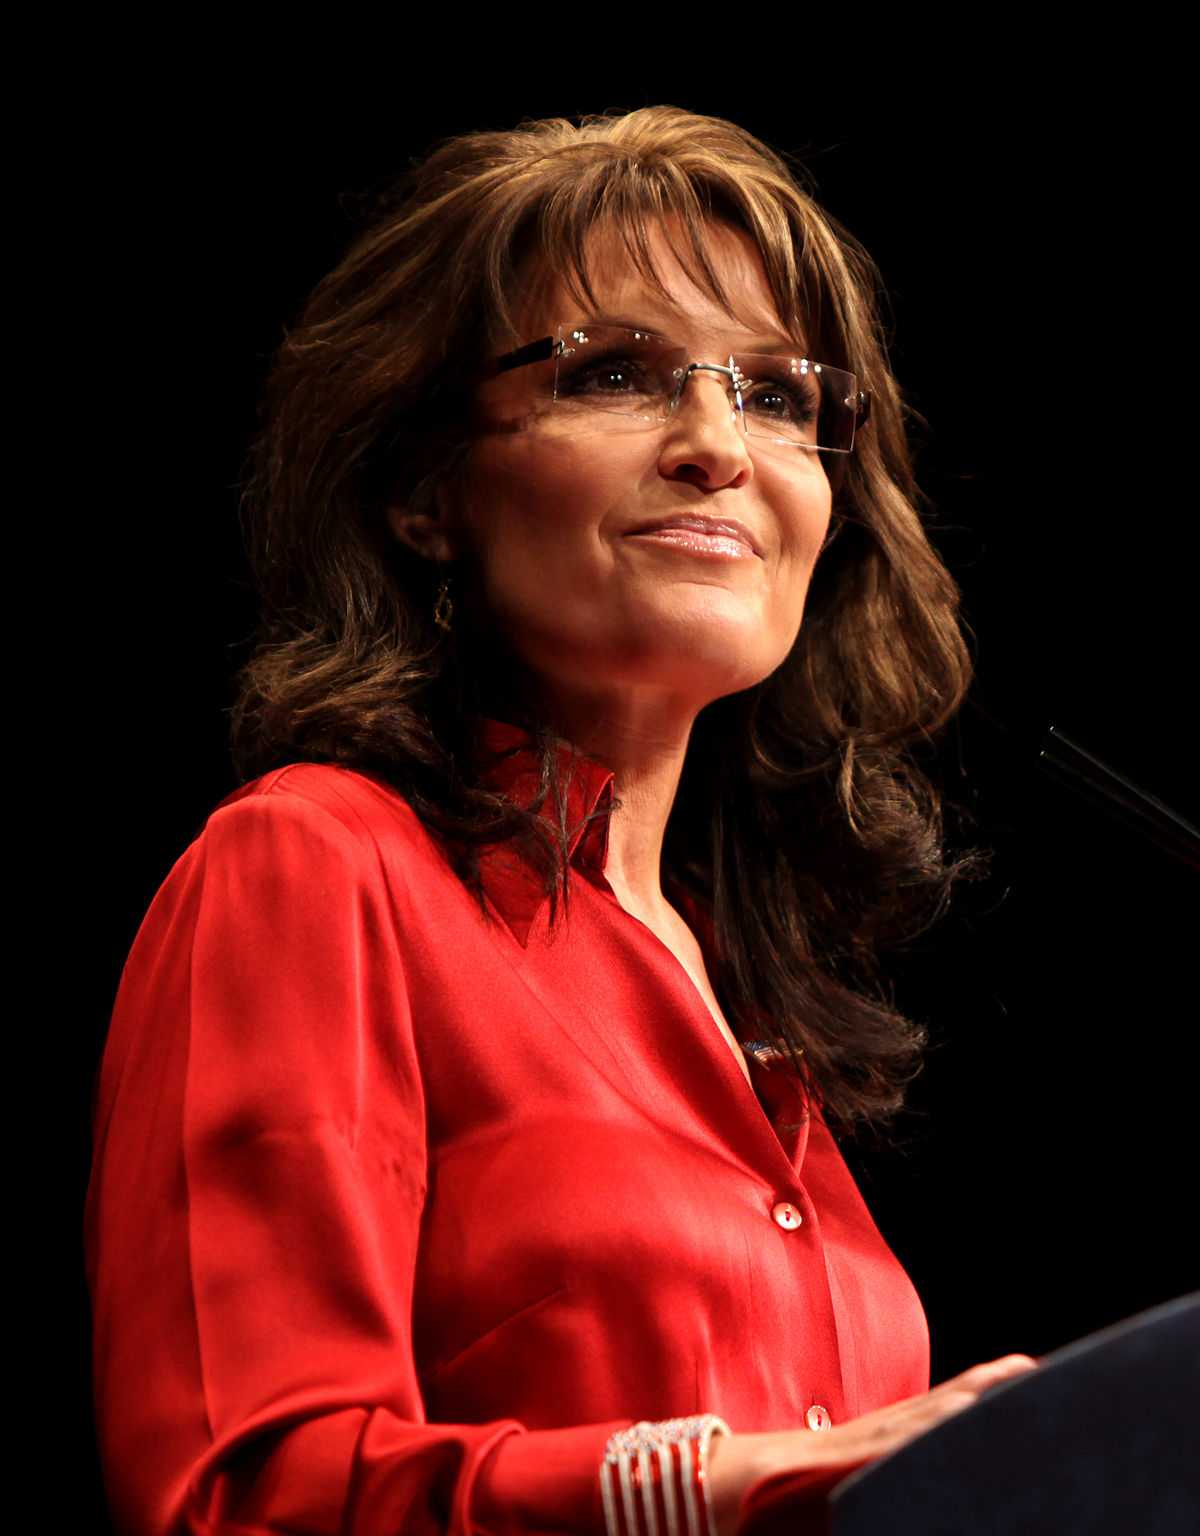 51 Hottest Sarah Palin Bikini Pictures Are A Genuine Masterpiece | Best Of Comic Books